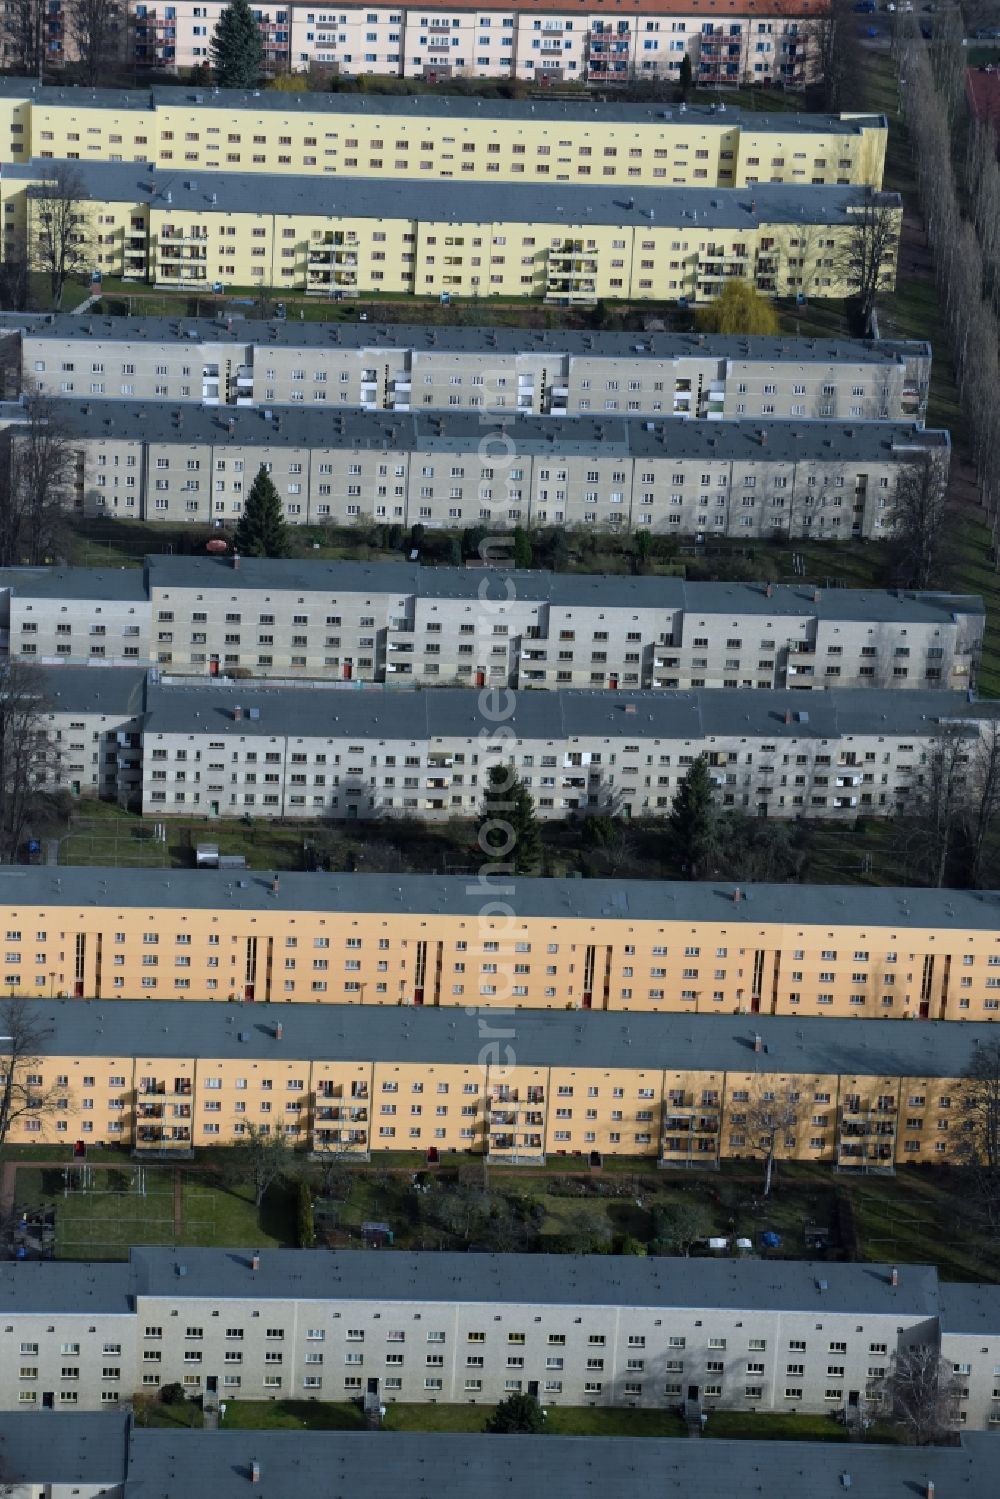 Aerial image Magdeburg - Residential area a row house settlement Walbecker Strasse - Hohendodeleber Strasse in the district Stadtfeld West in Magdeburg in the state Saxony-Anhalt